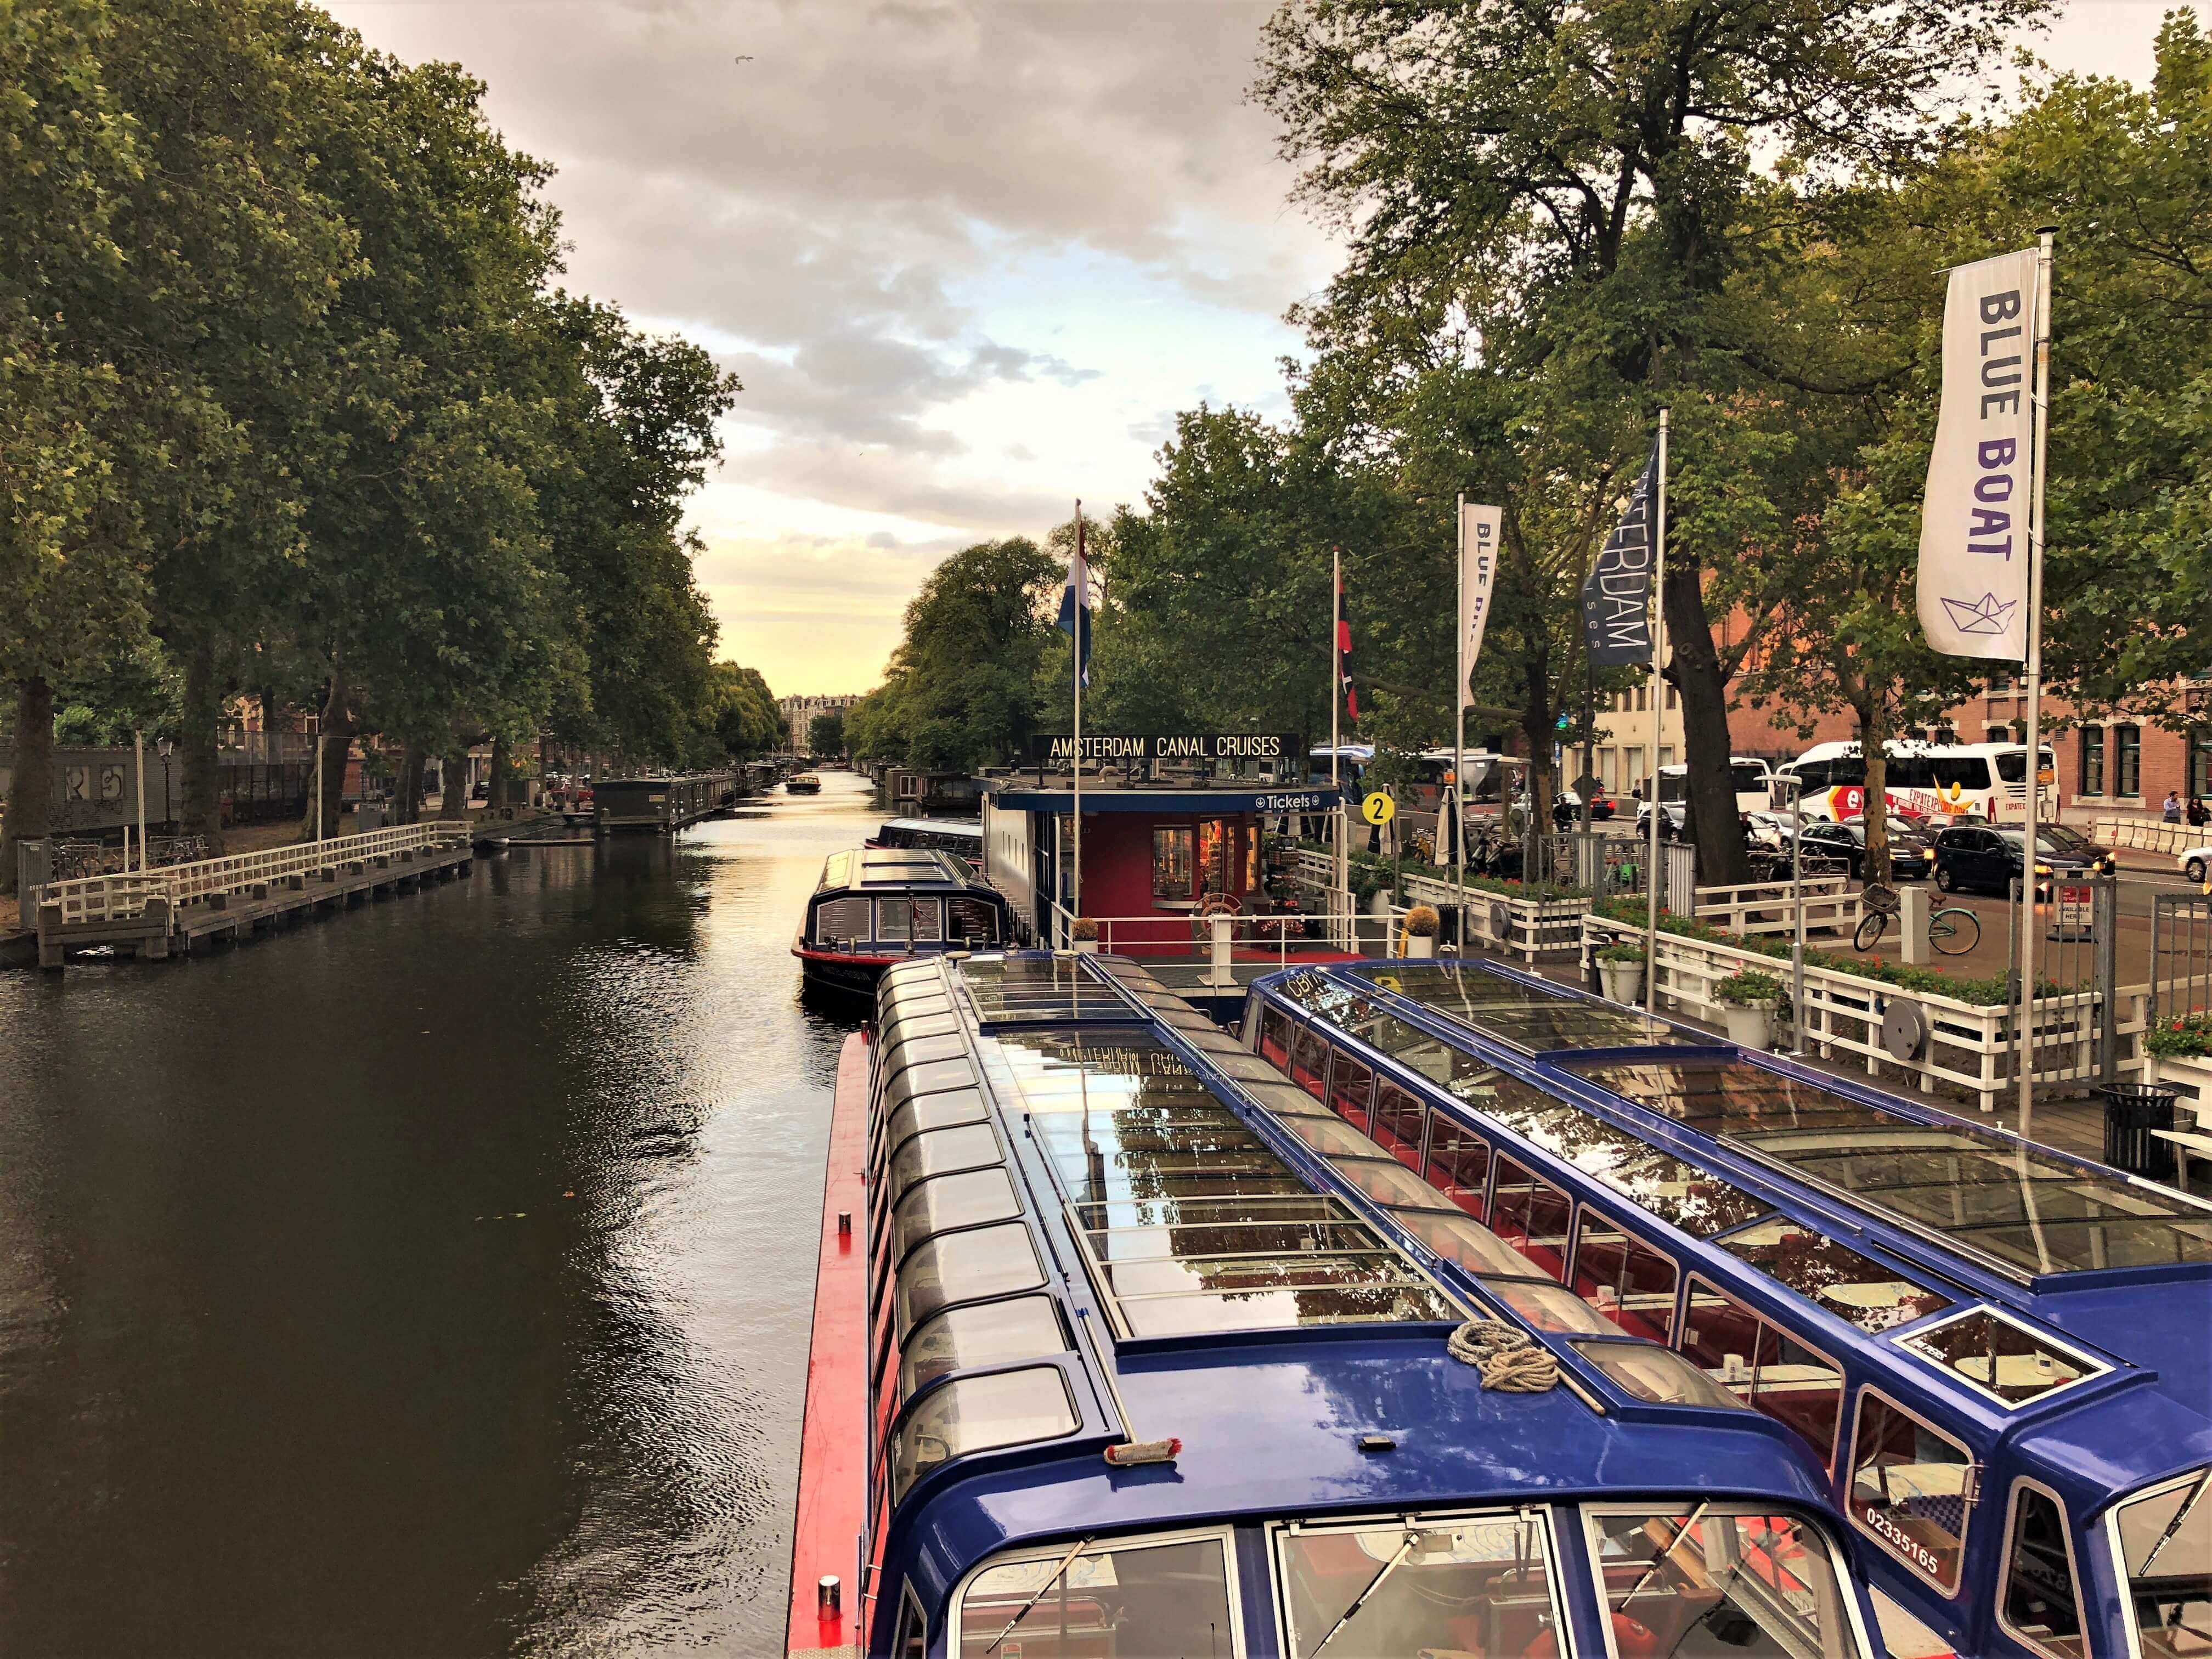 Boat trip on a canal in Amsterdam